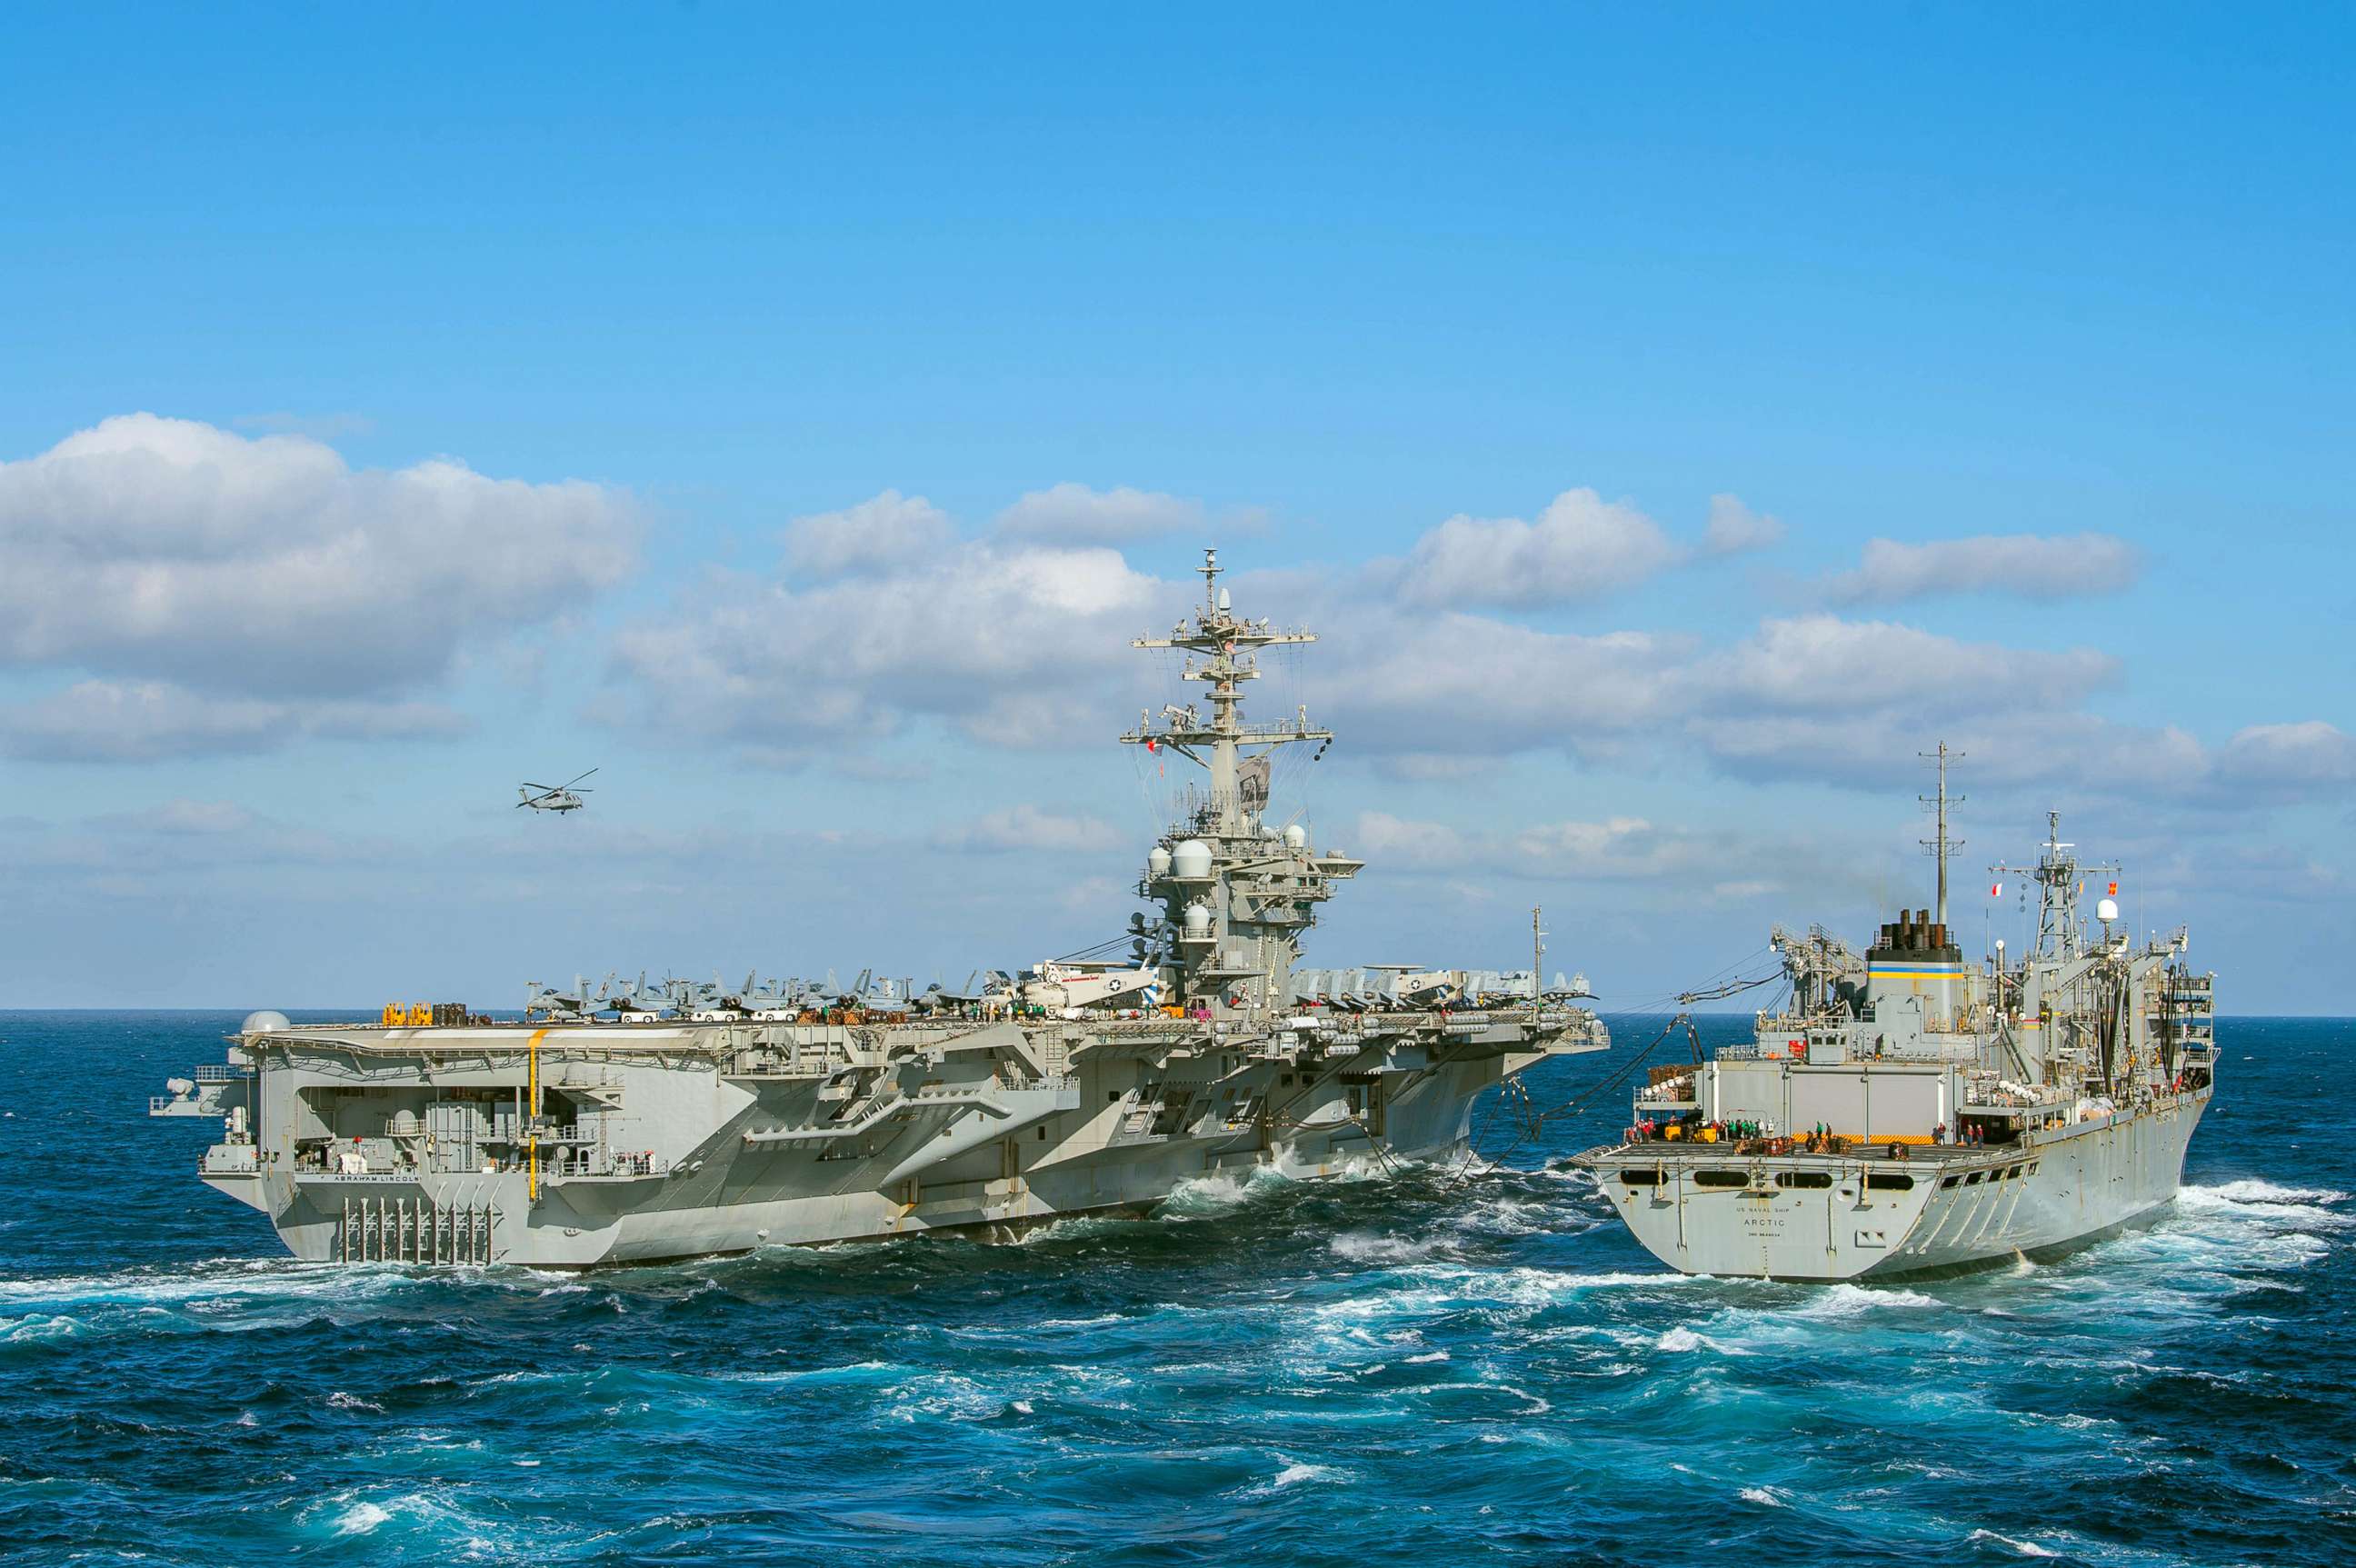 PHOTO: The Nimitz-class aircraft carrier USS Abraham Lincoln conducts a replenishment-at-sea  with the fast combat support ship USNS Arctic, April 12, 2019 in the Atlantic ocean.